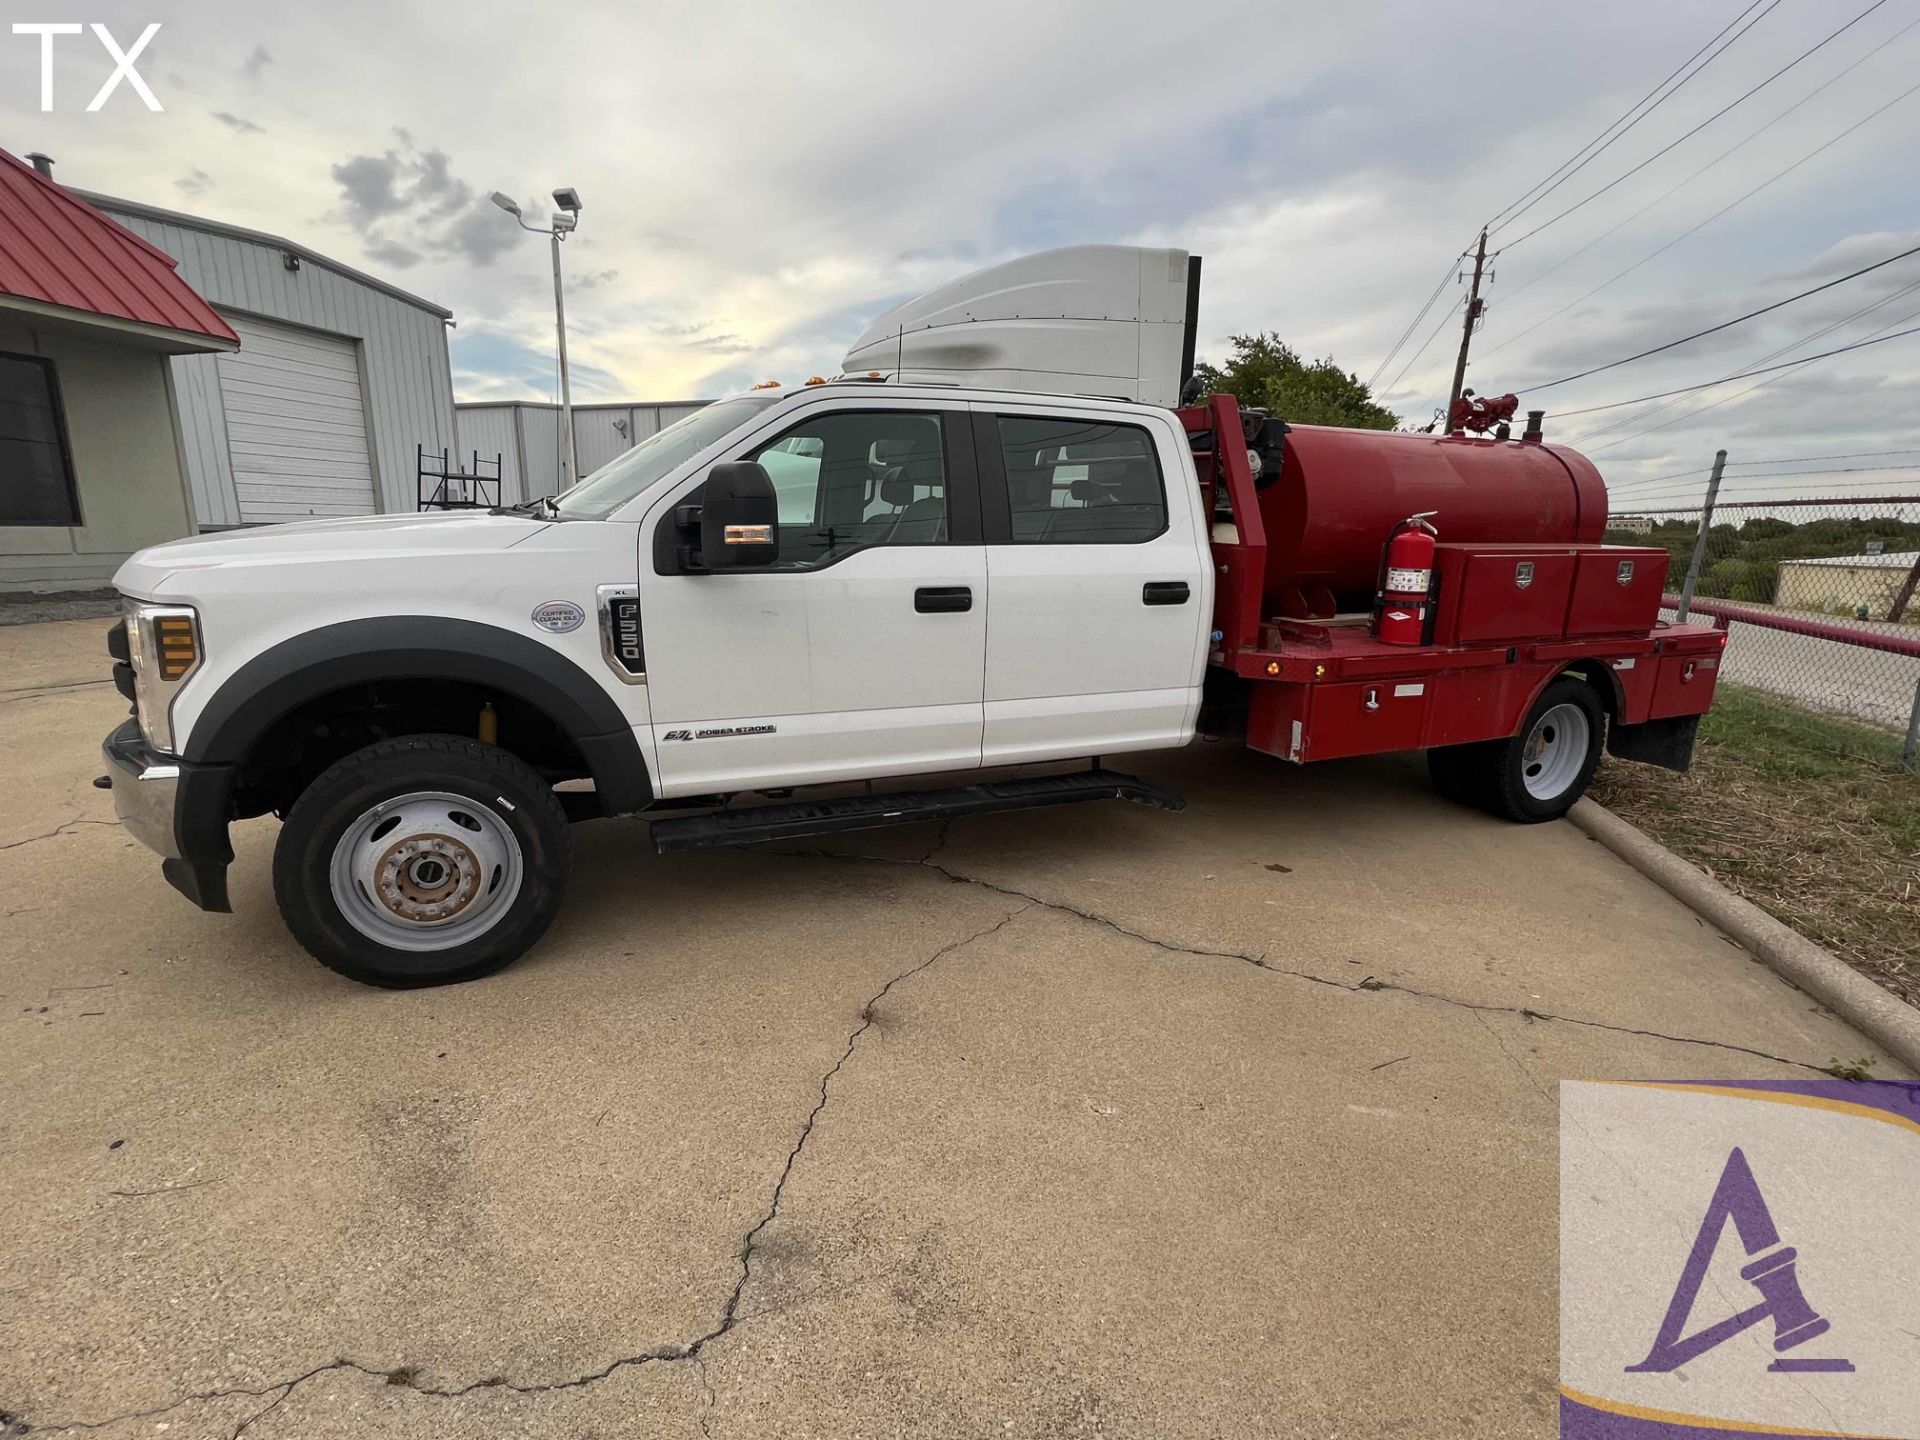 2019 Ford F550 4x4 Crew Cab Fuel Truck, Ingersoll-Rand Air Compressor, Toolboxes!